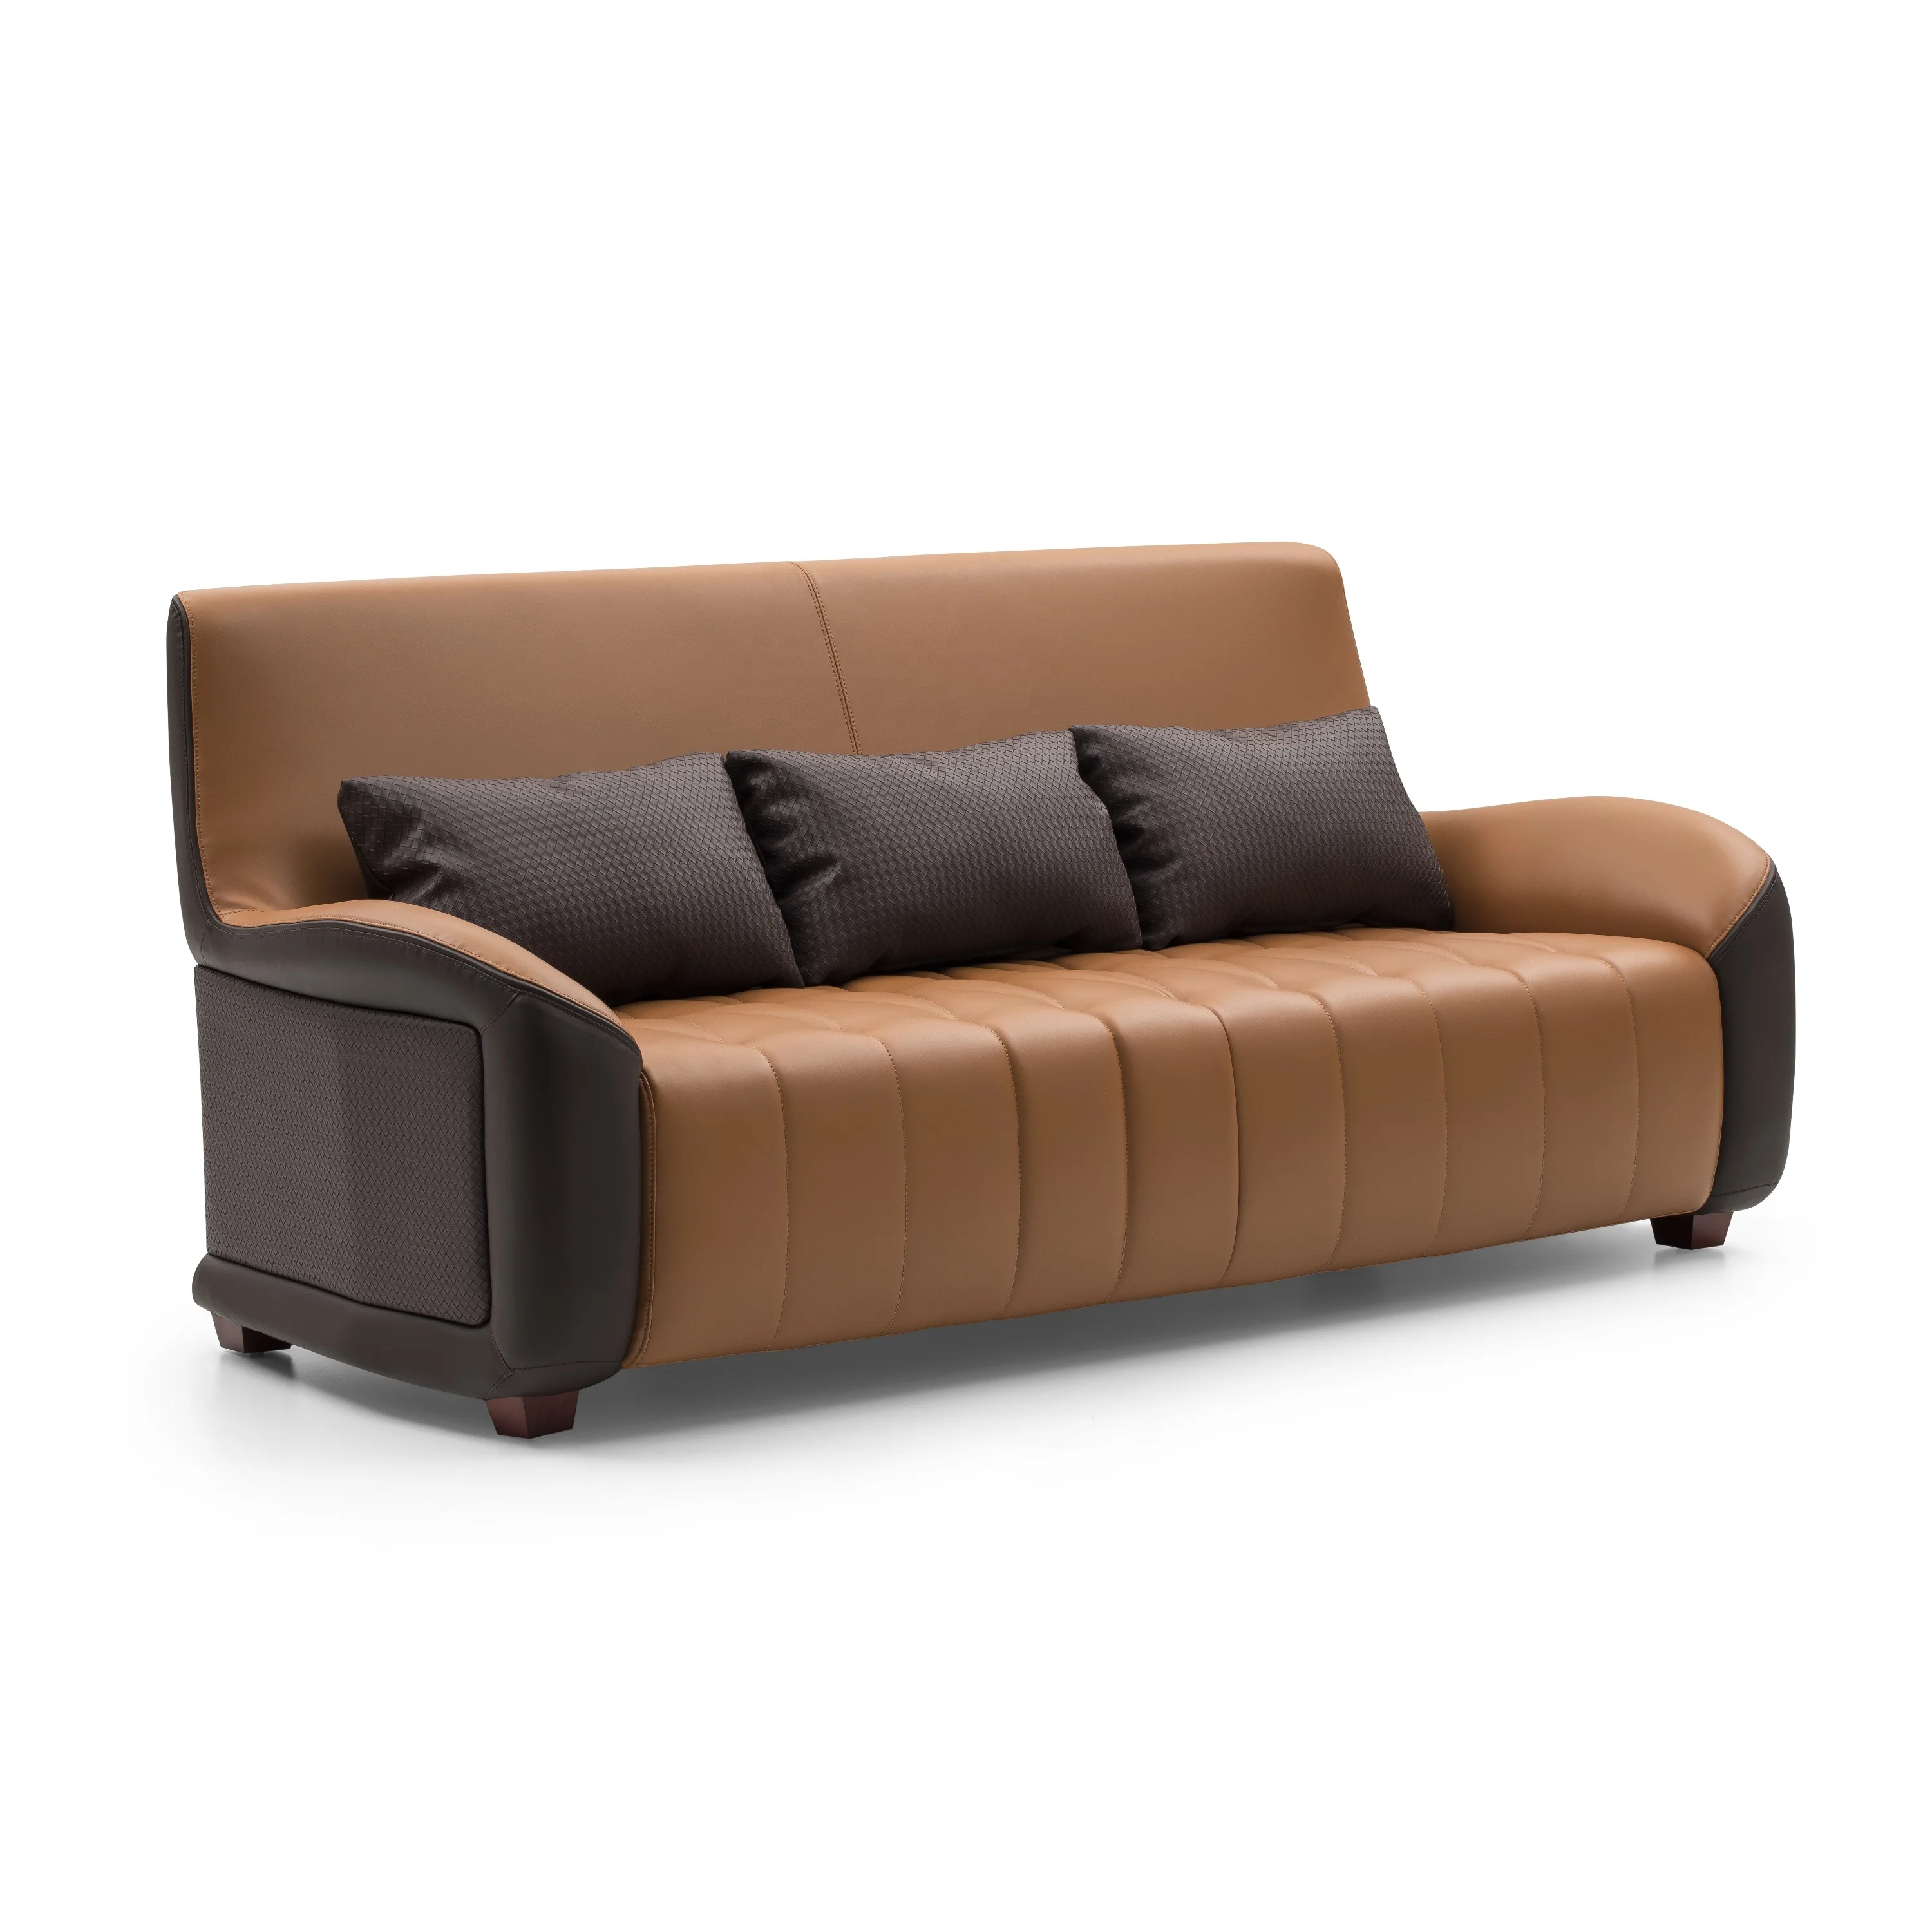 High quality cheap price contemporary brown and tan PU leather 3 seat sofa set furniture office